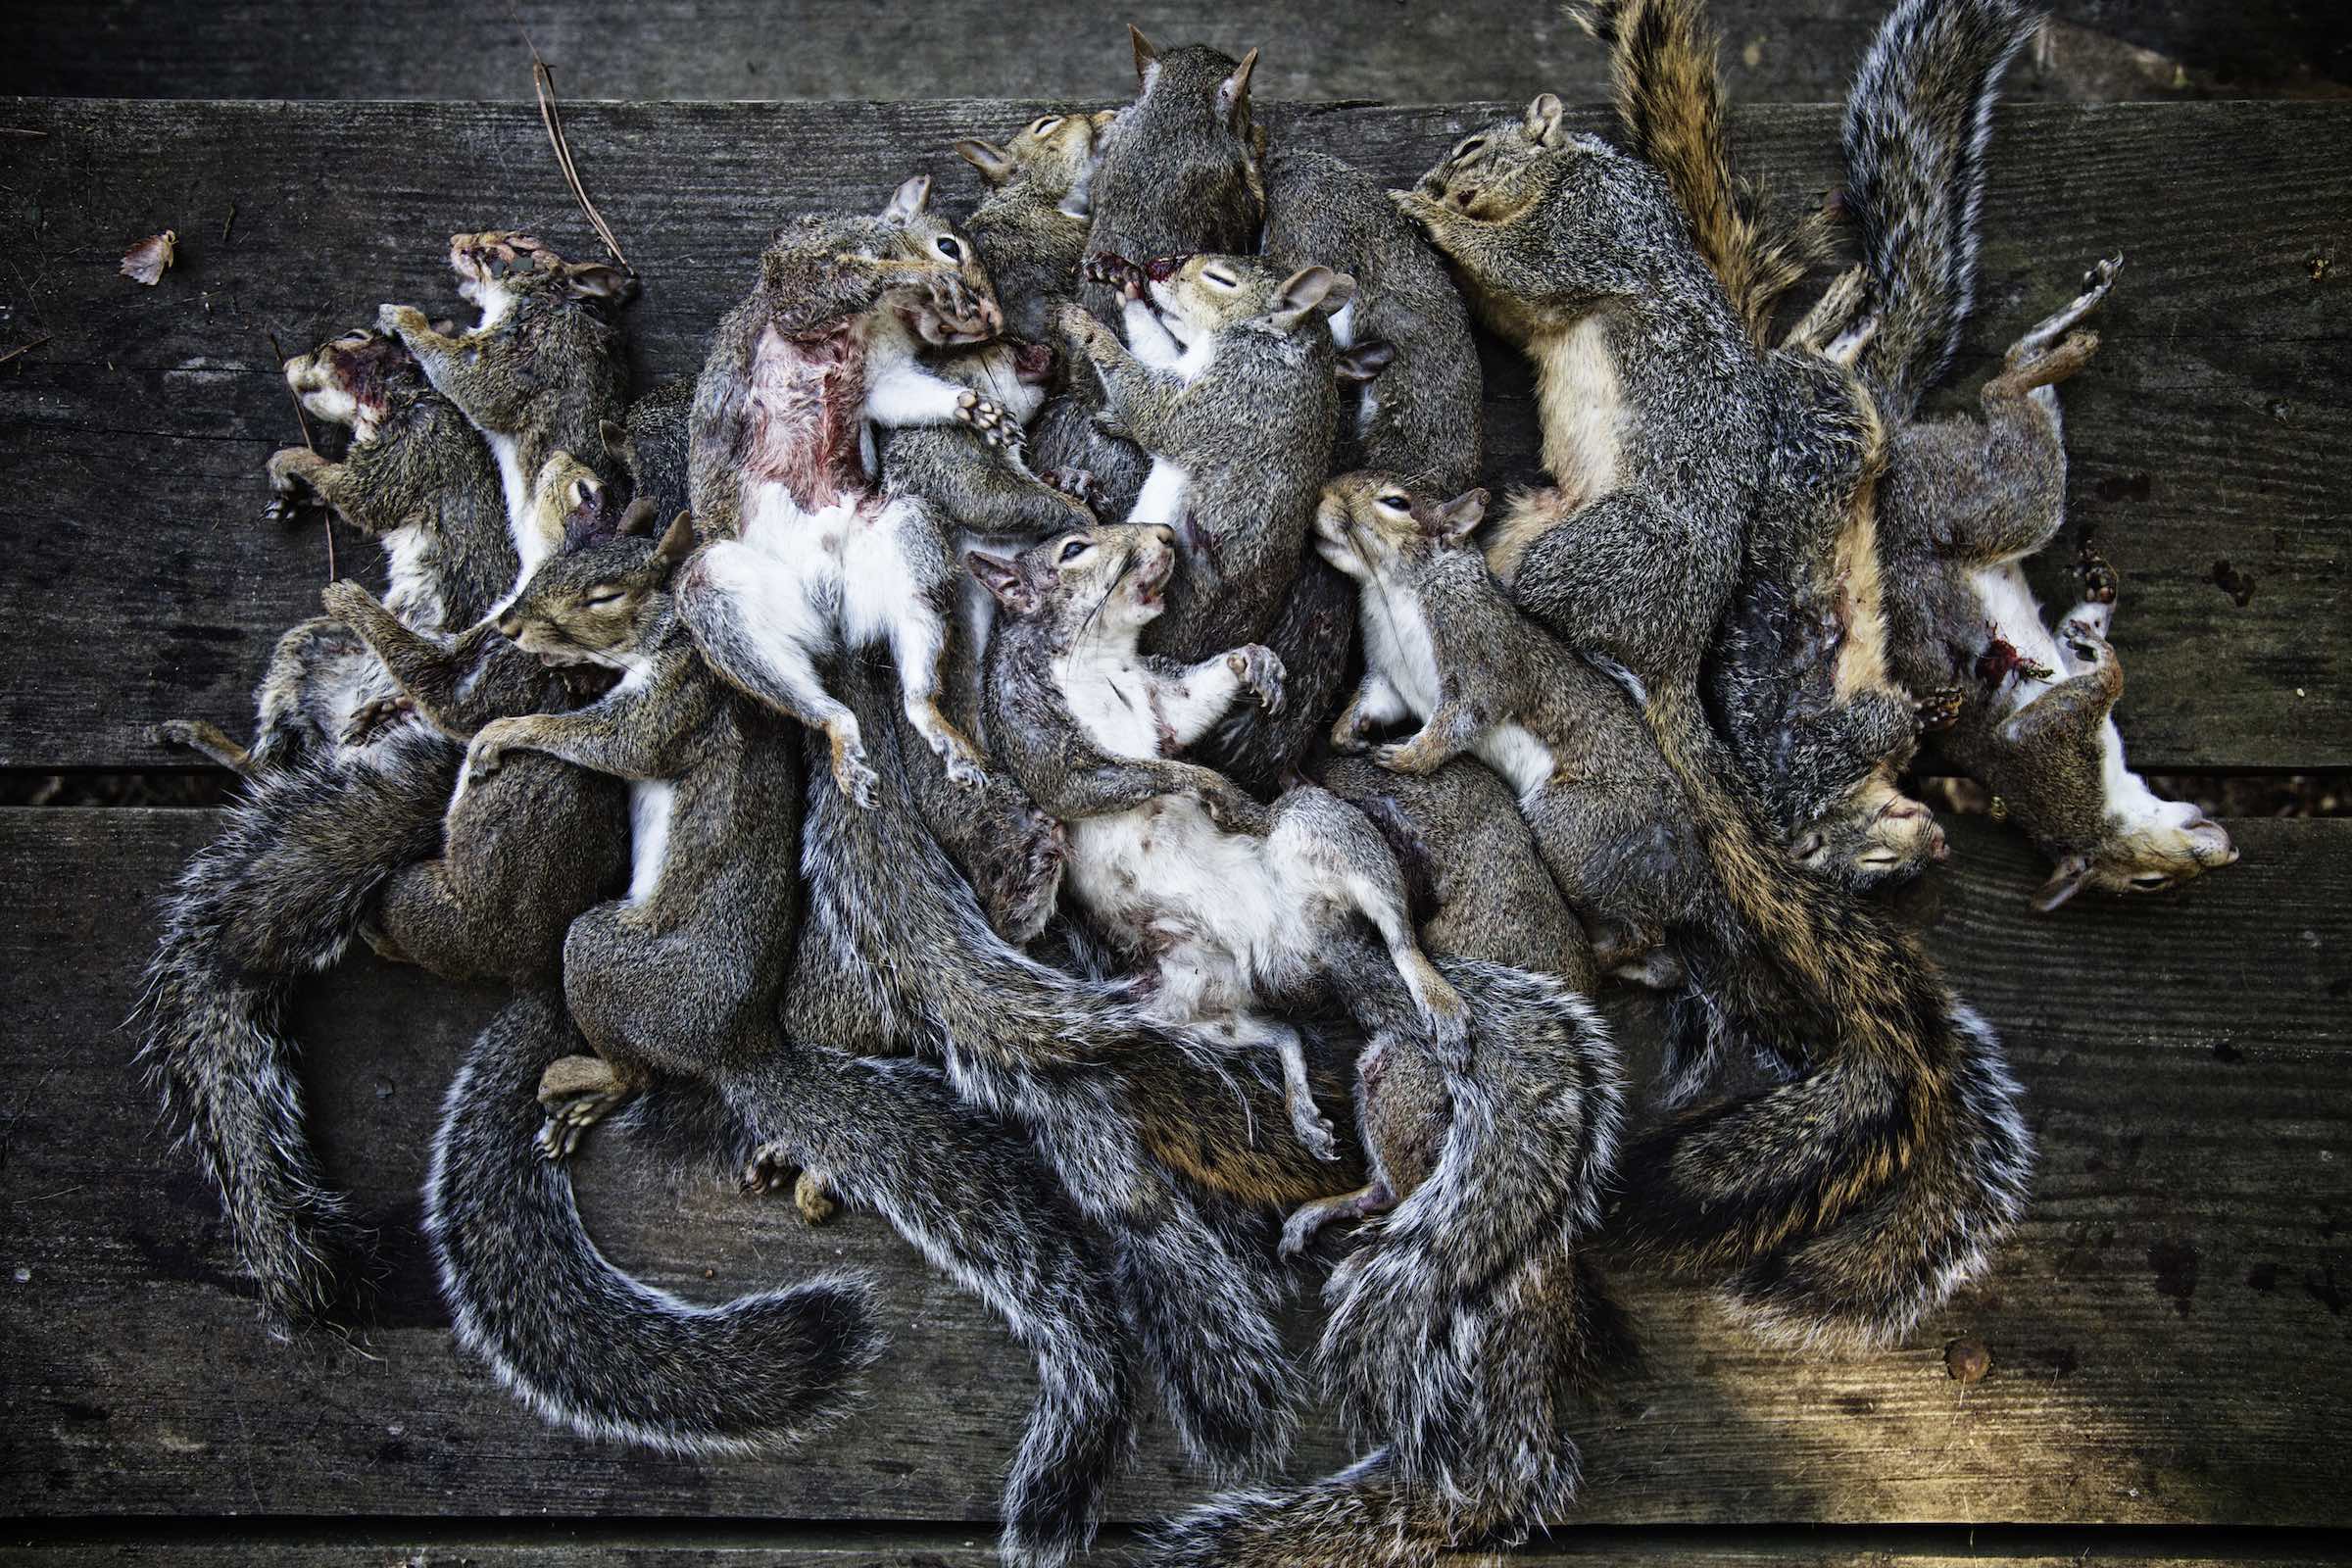 Jody Horton Photography - Dead squirrels piled together on a wood picnic table. 